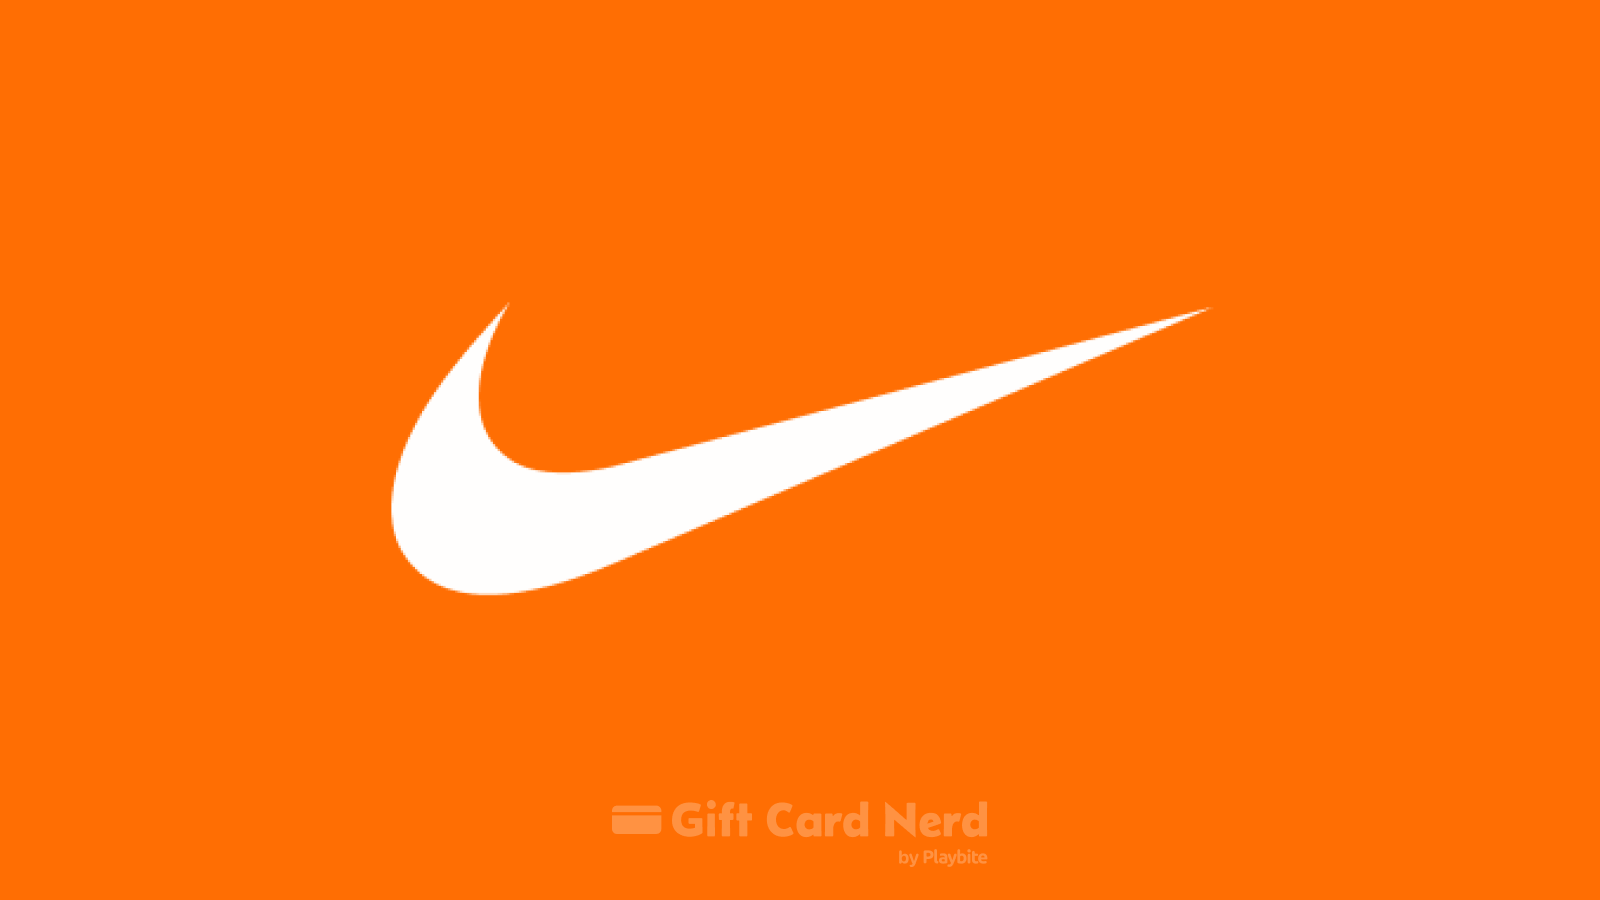 Can I Use a Nike Gift Card on Cash App?